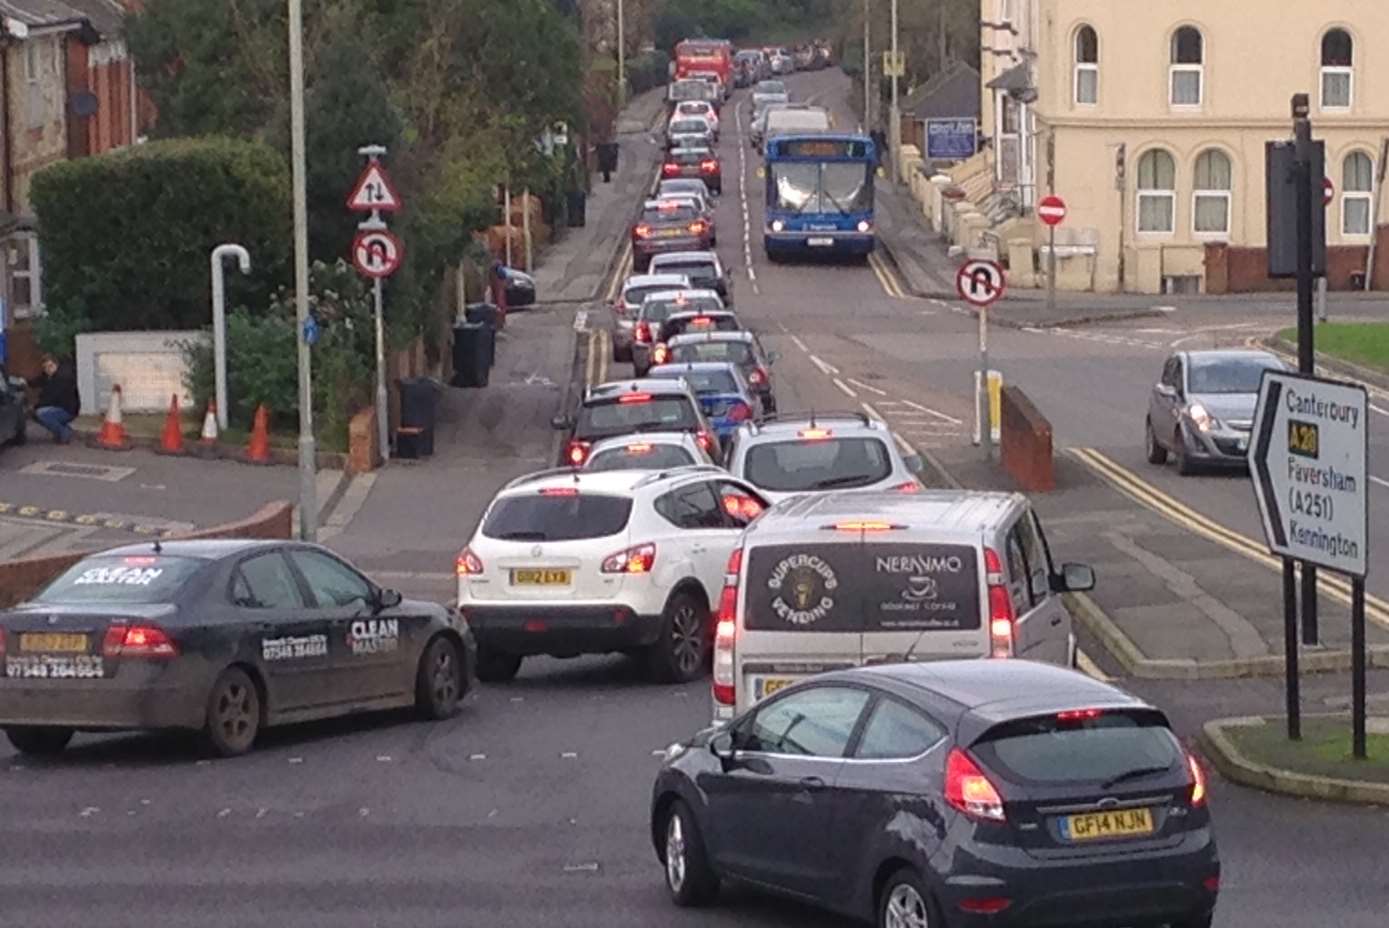 Traffic is tailing back into the town centre following the crash